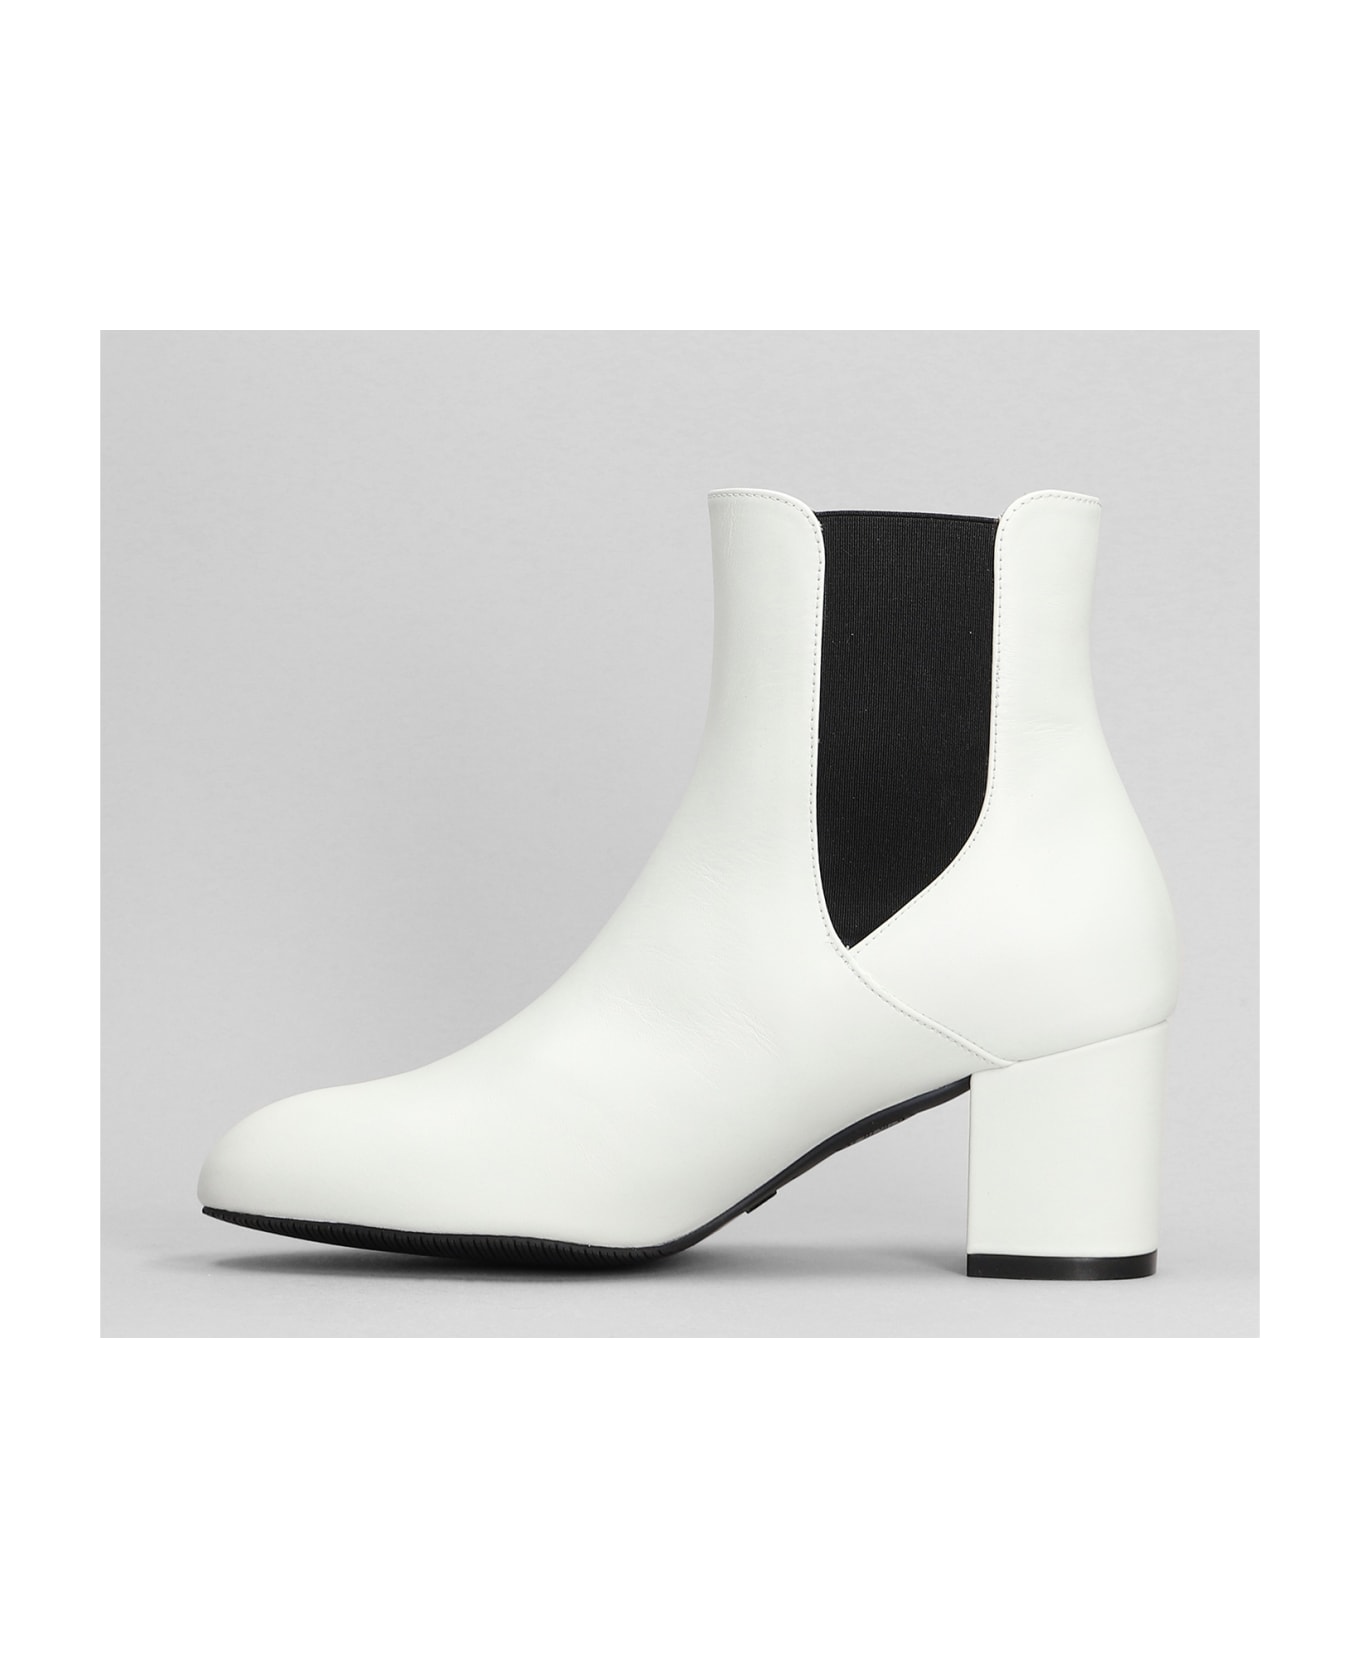 Stuart Weitzman Yuliana 60 Ankle Boots In White Leather - white ブーツ